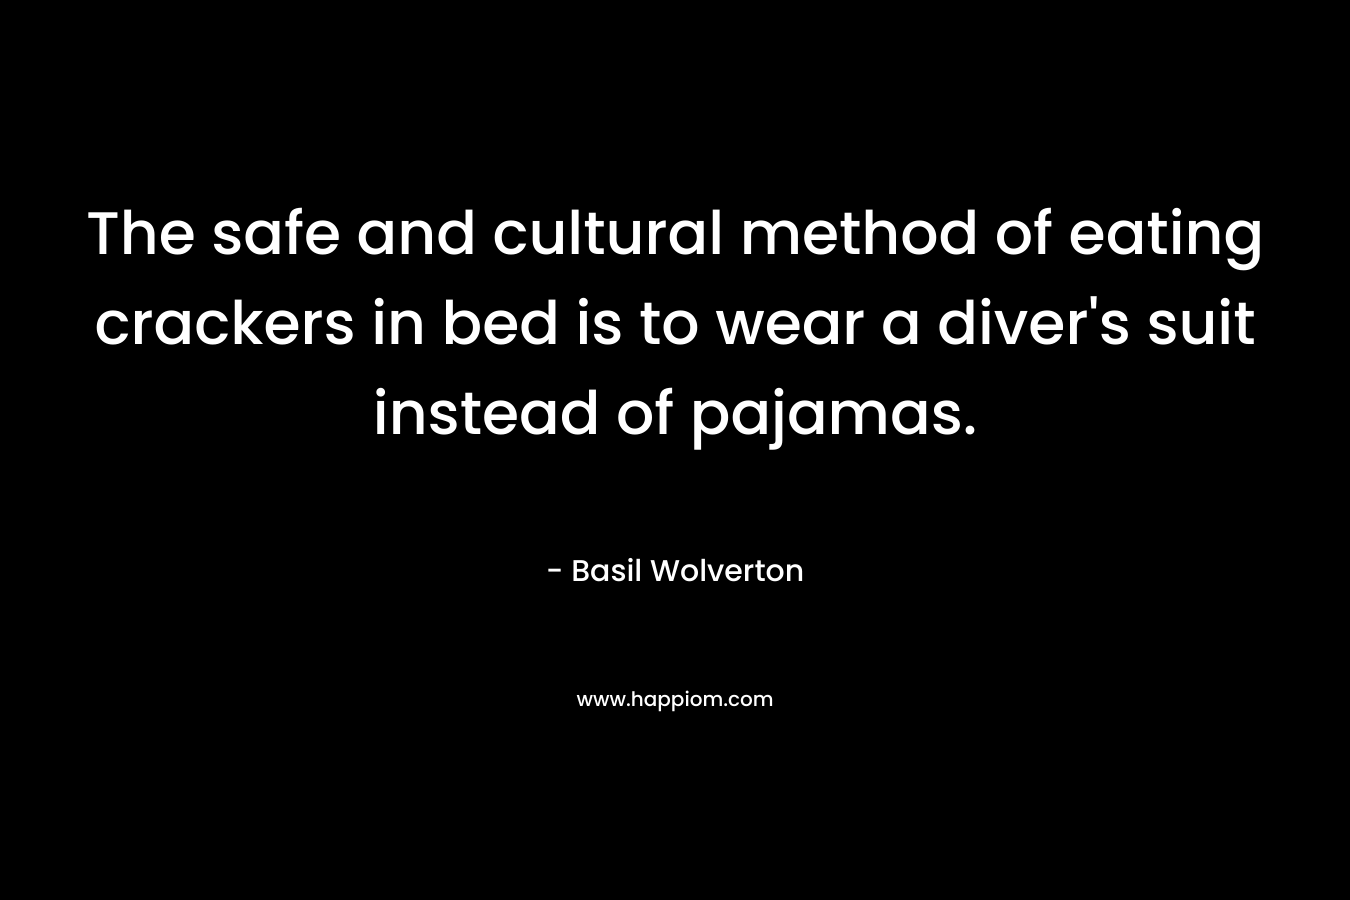 The safe and cultural method of eating crackers in bed is to wear a diver's suit instead of pajamas.